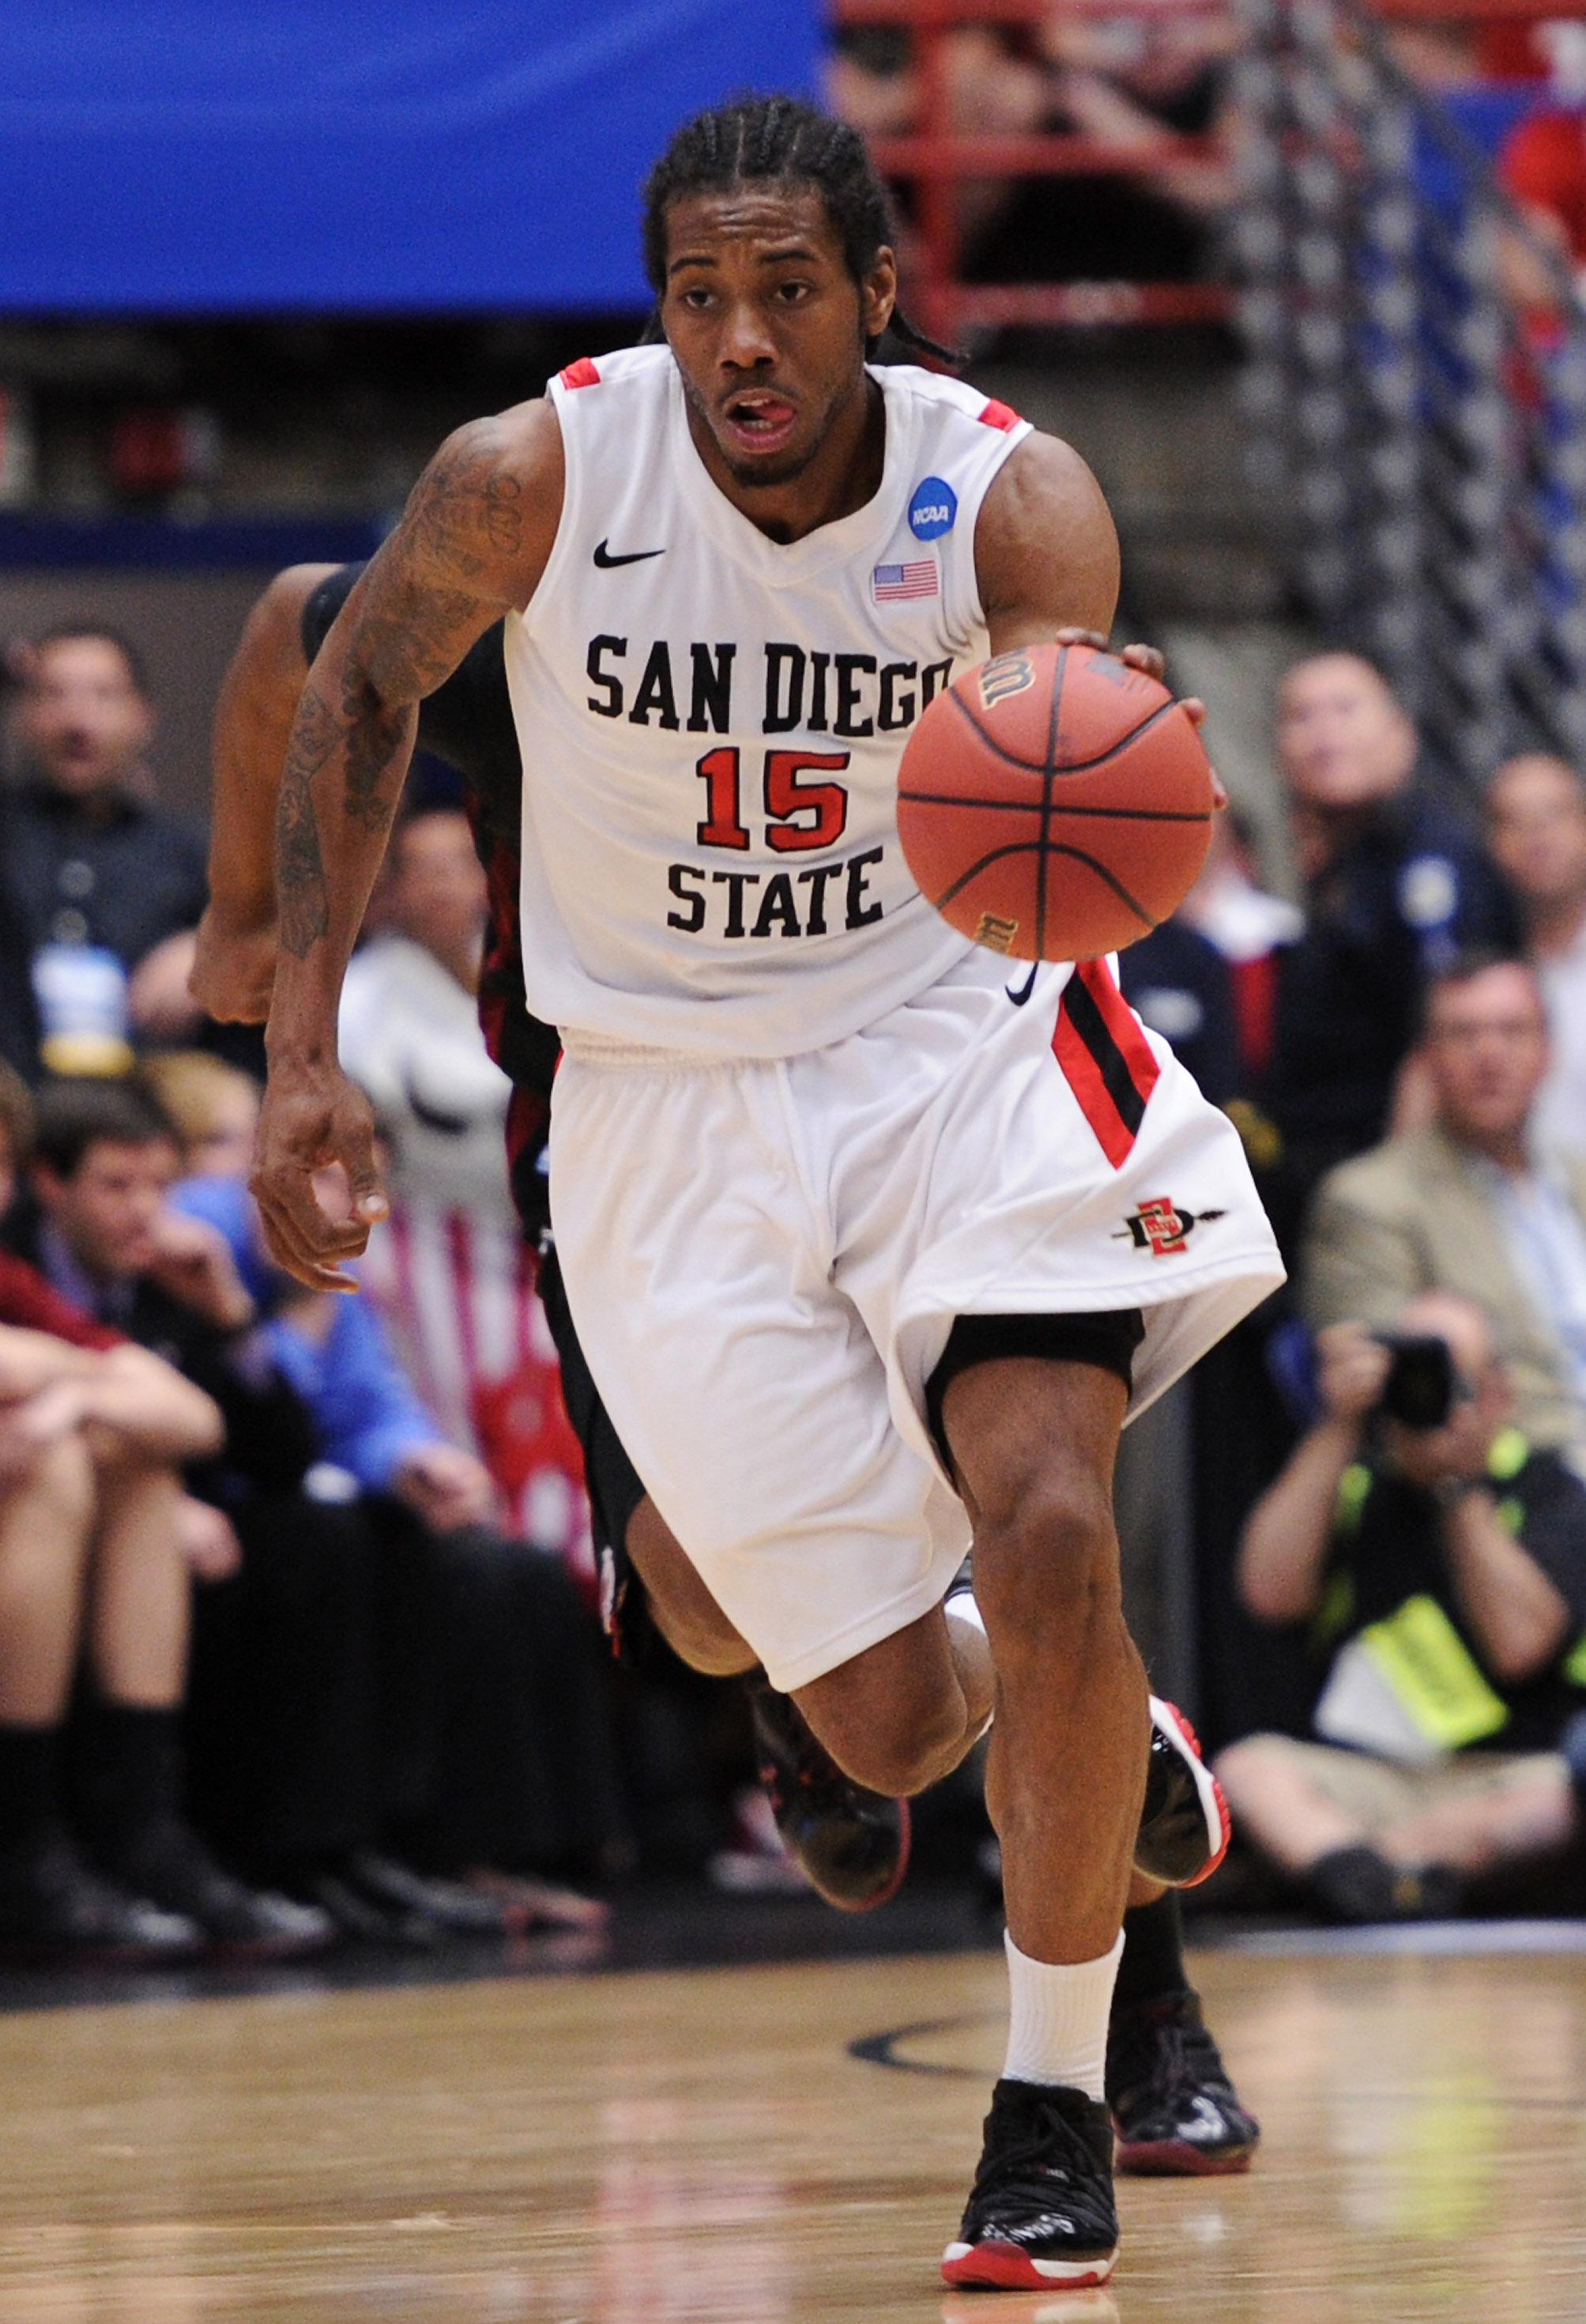 TUCSON, AZ - MARCH 19:  Kawhi Leonard #15 of the San Diego State Aztecs drives against the Temple Owls during the third round of the 2011 NCAA men's basketball tournament at McKale Center on March 19, 2011 in Tucson, Arizona.  (Photo by Harry How/Getty Im